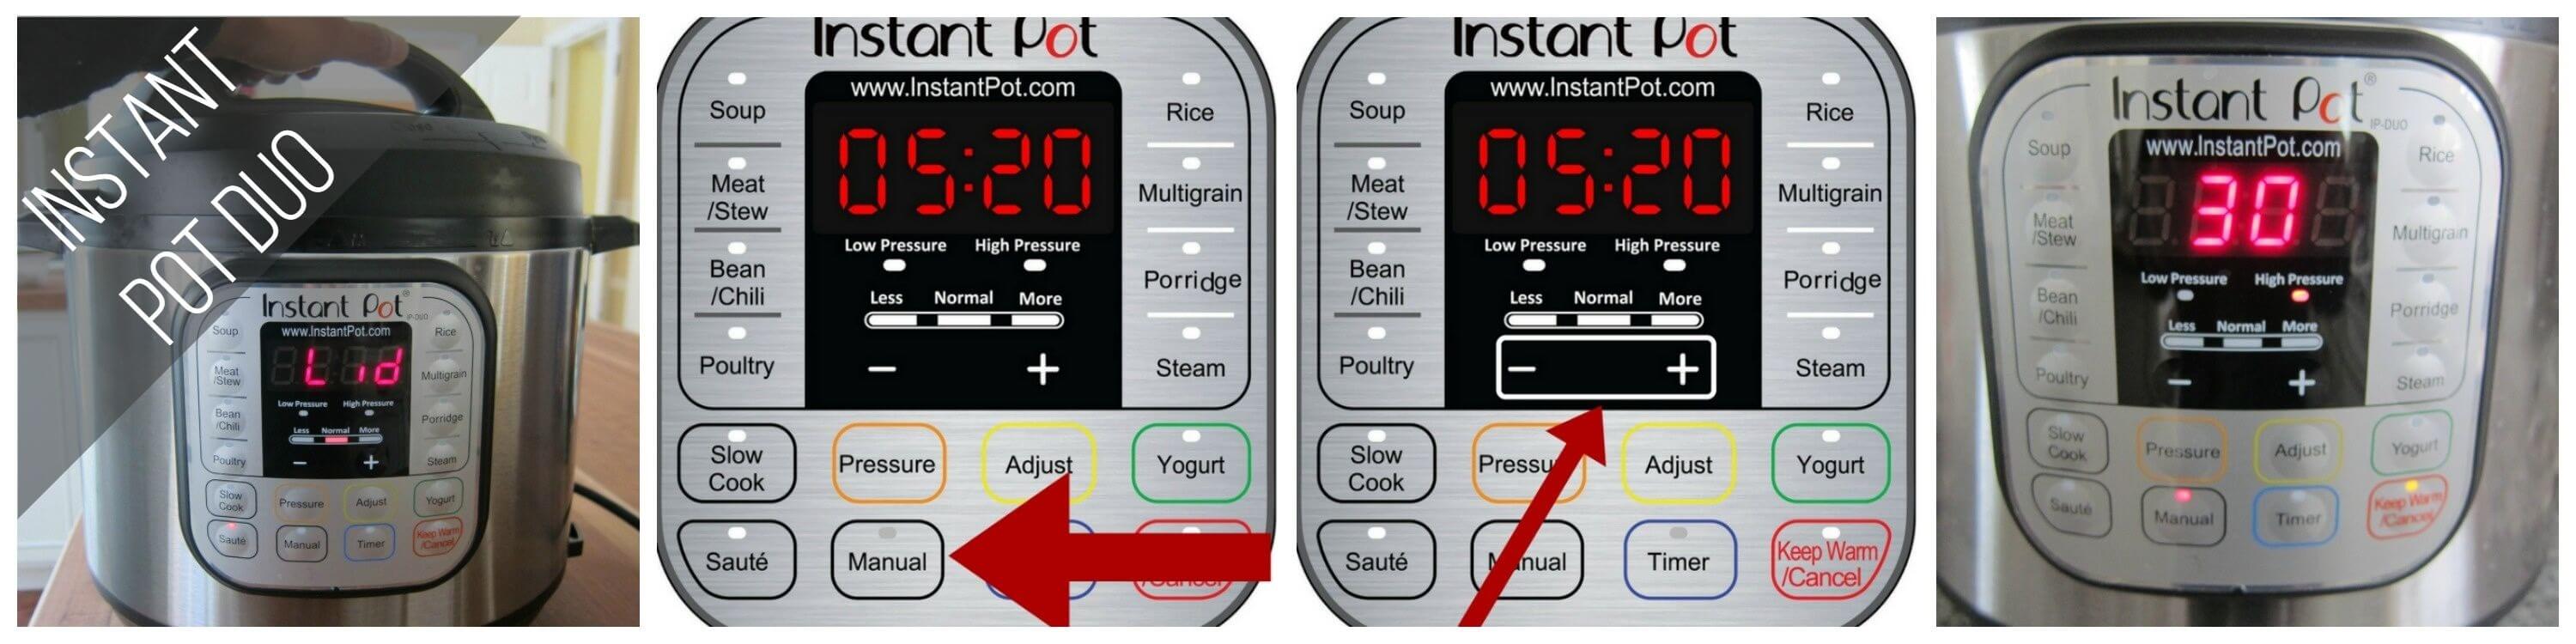 Instant Pot Duo Manual mode 30 minutes collage - close lid, press manual, press - or +, display shows 30 - Paint the Kitchen Red